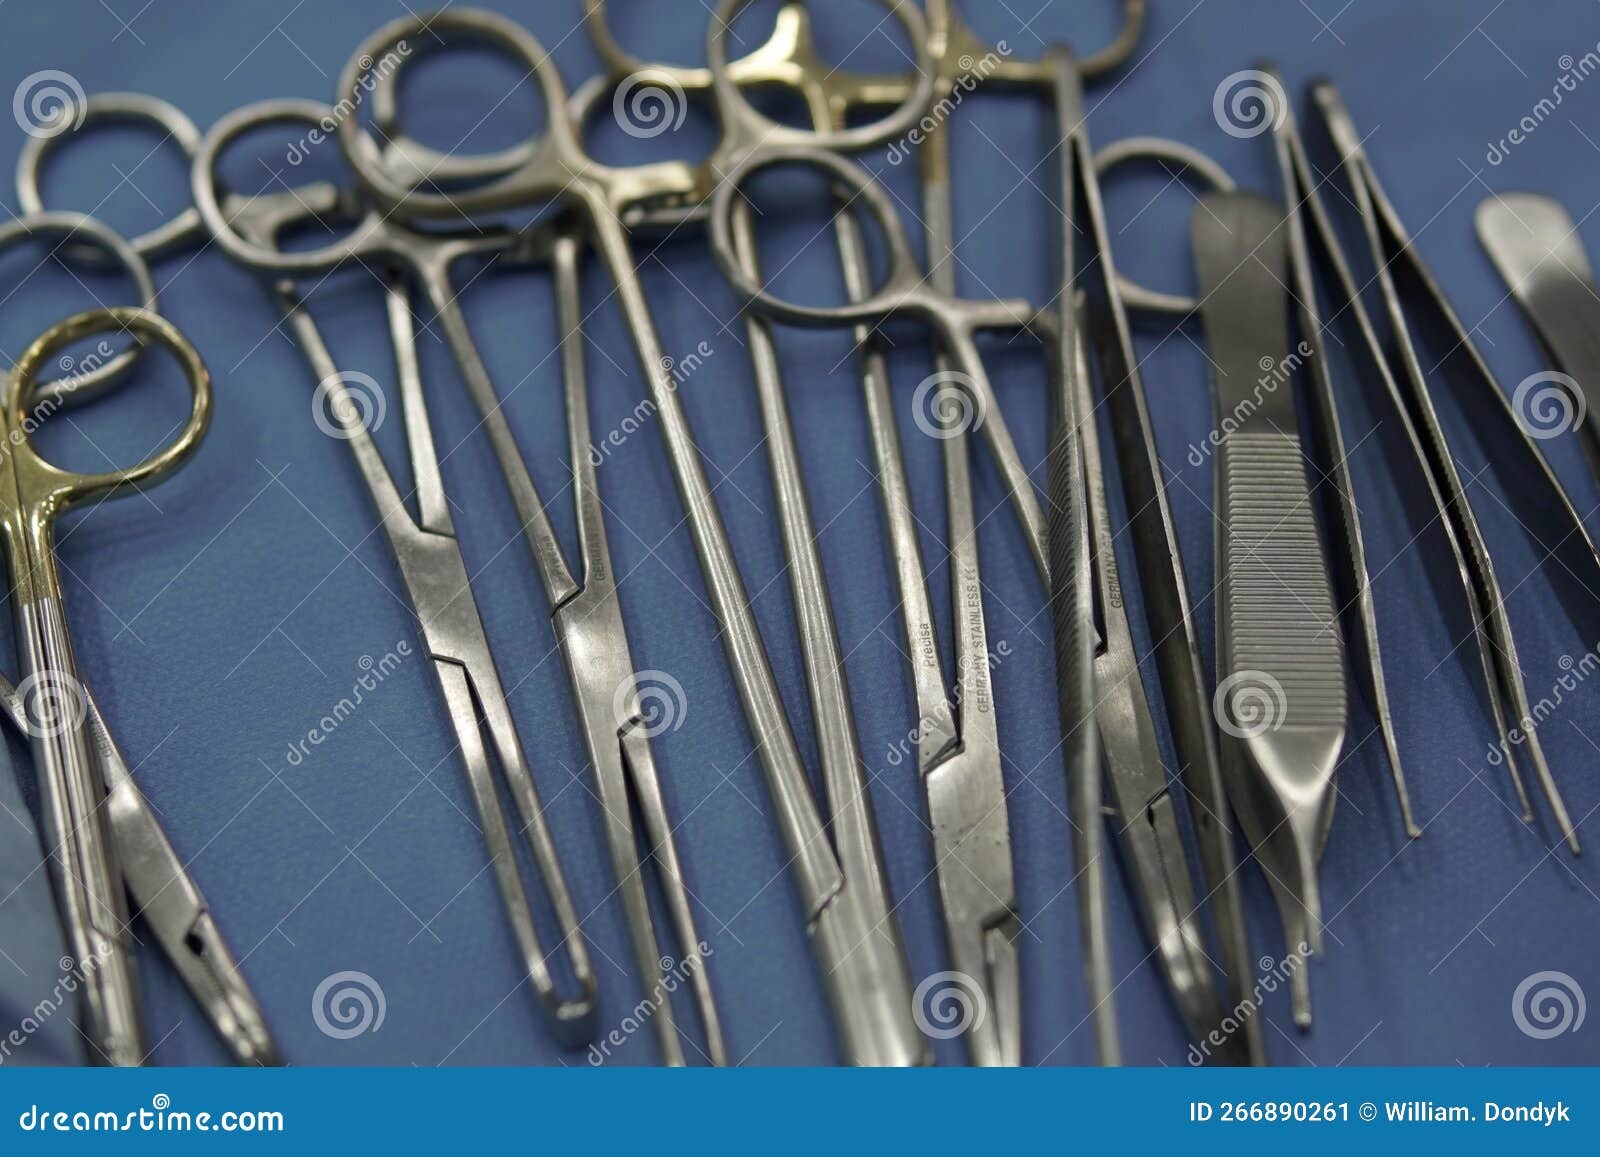 sissors tools for surgical operation